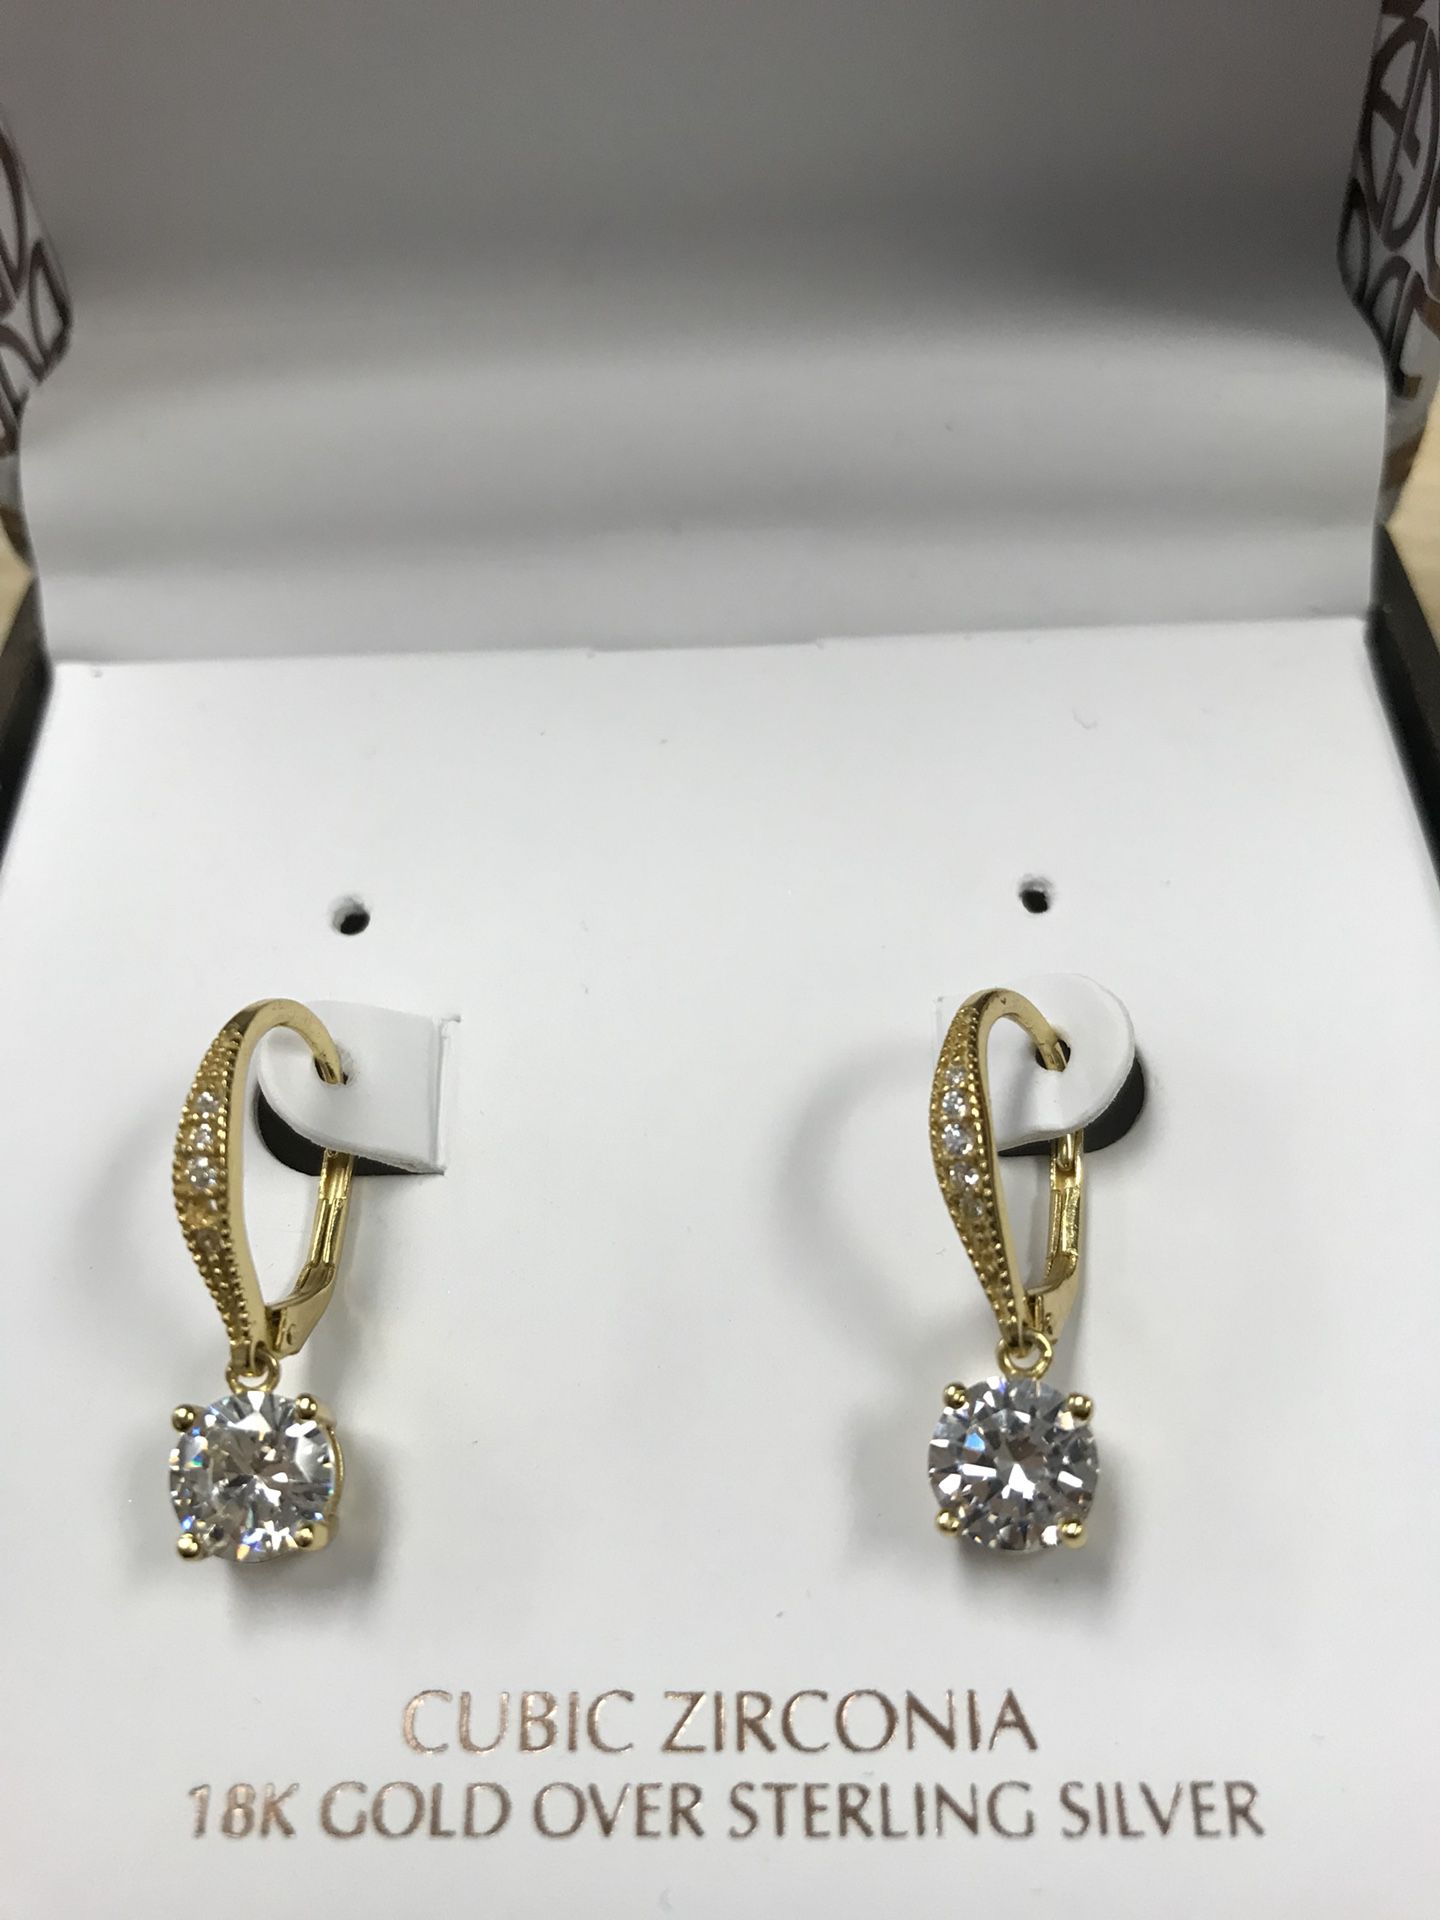 Giani Bernini” earrings. Gift and used only once. Valued at $85